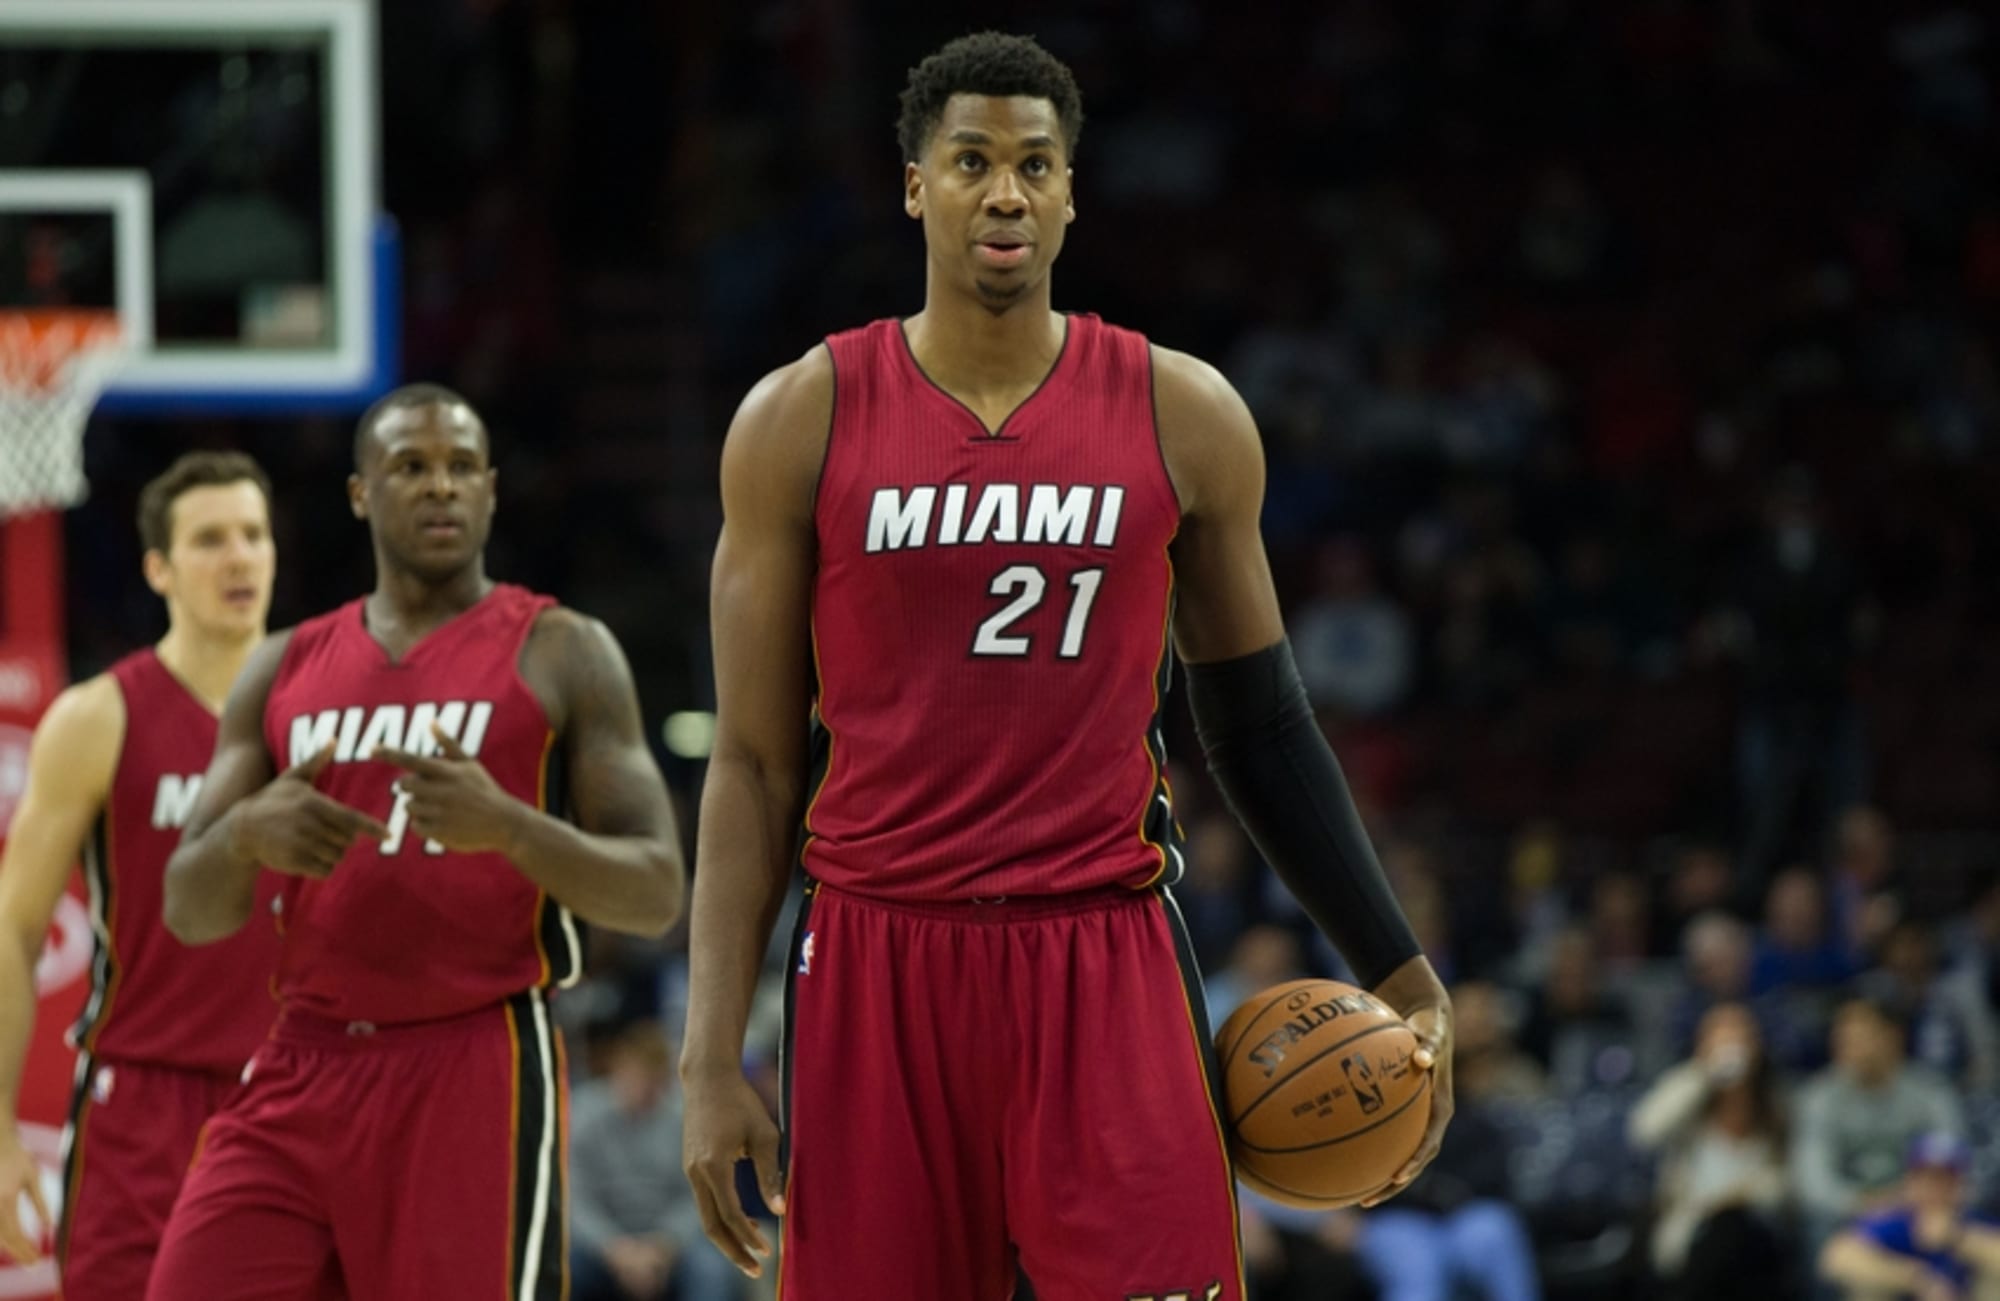 Hassan Whiteside Loses His Mind After Foul Call